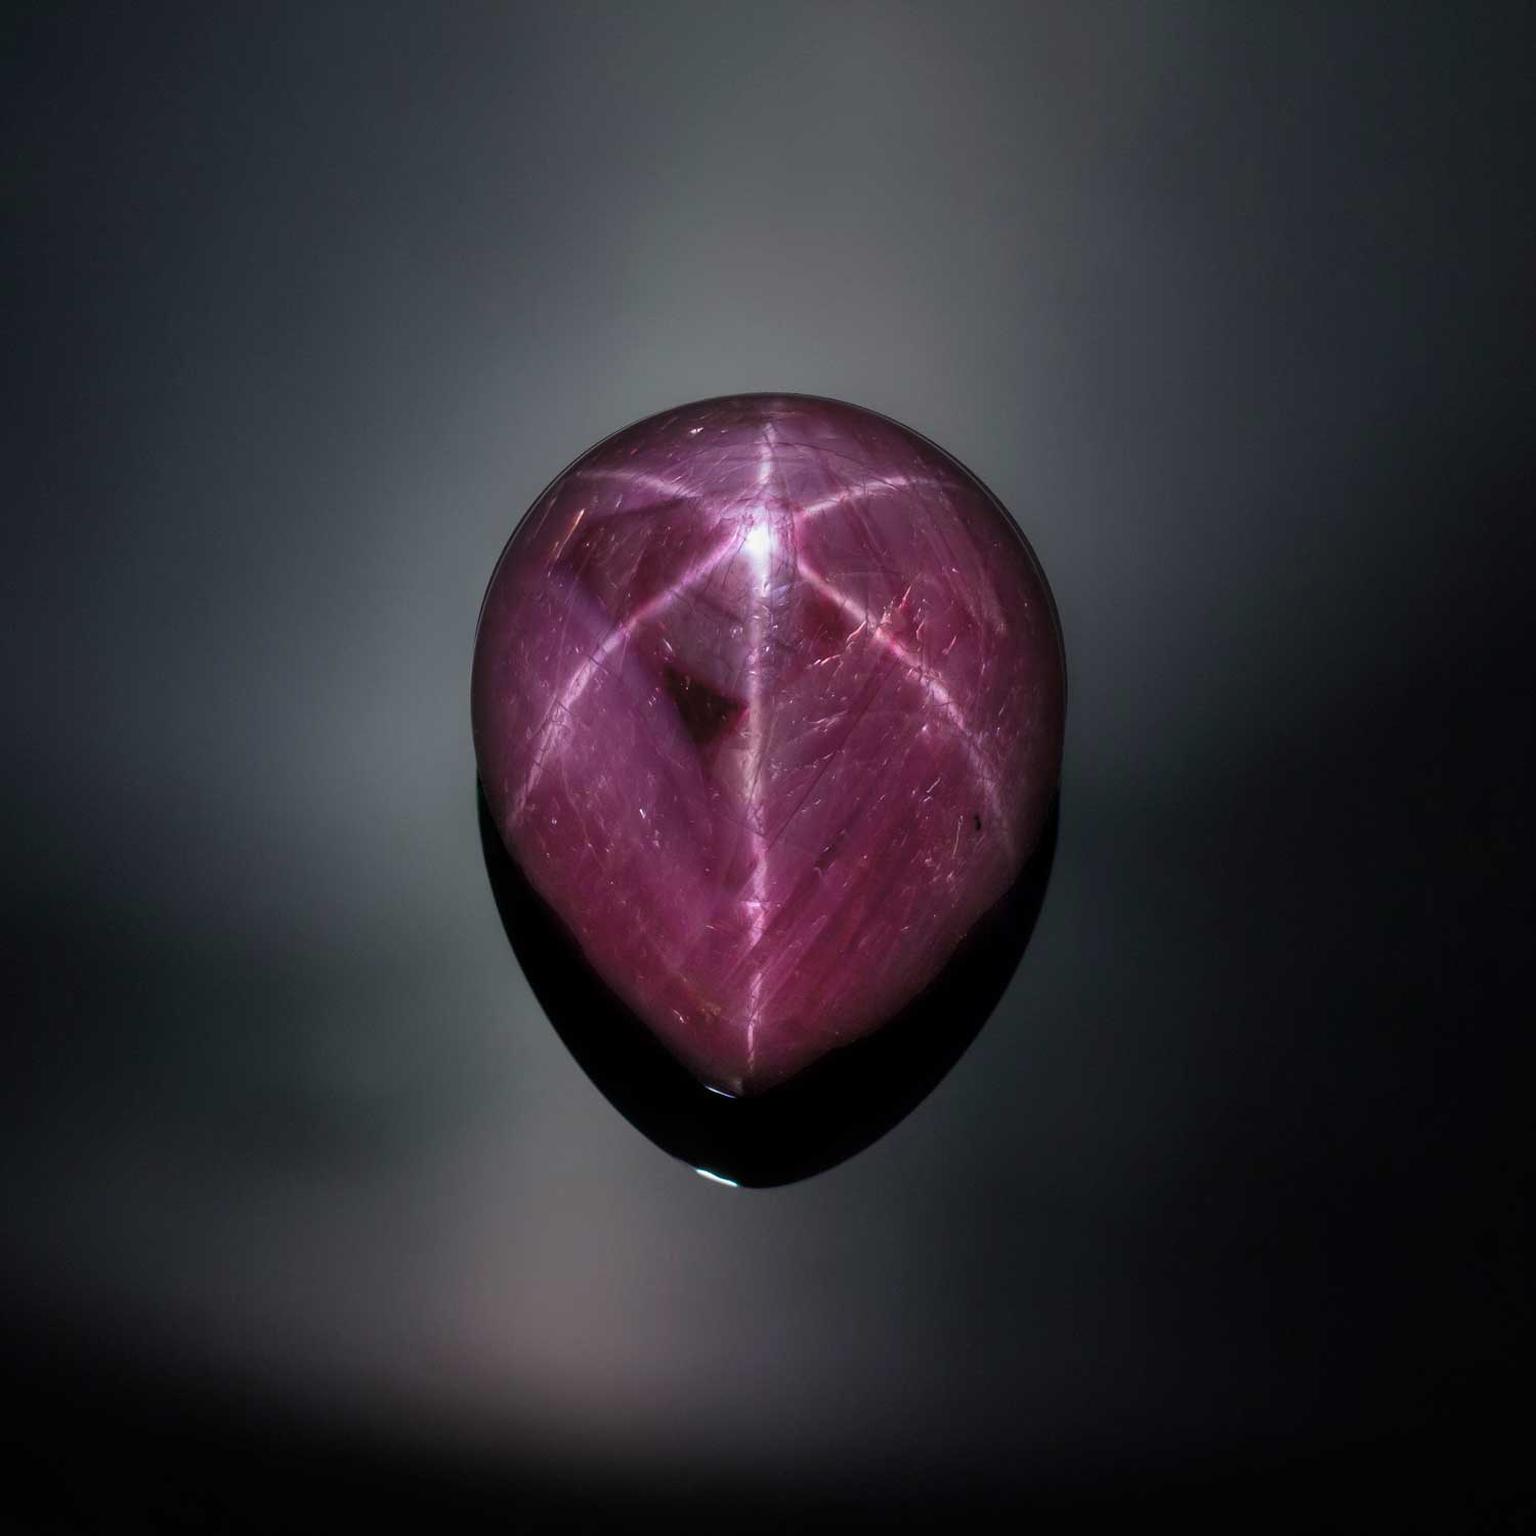 52.36 carat Misty Star ruby, part of the Mountain Star Ruby collection 